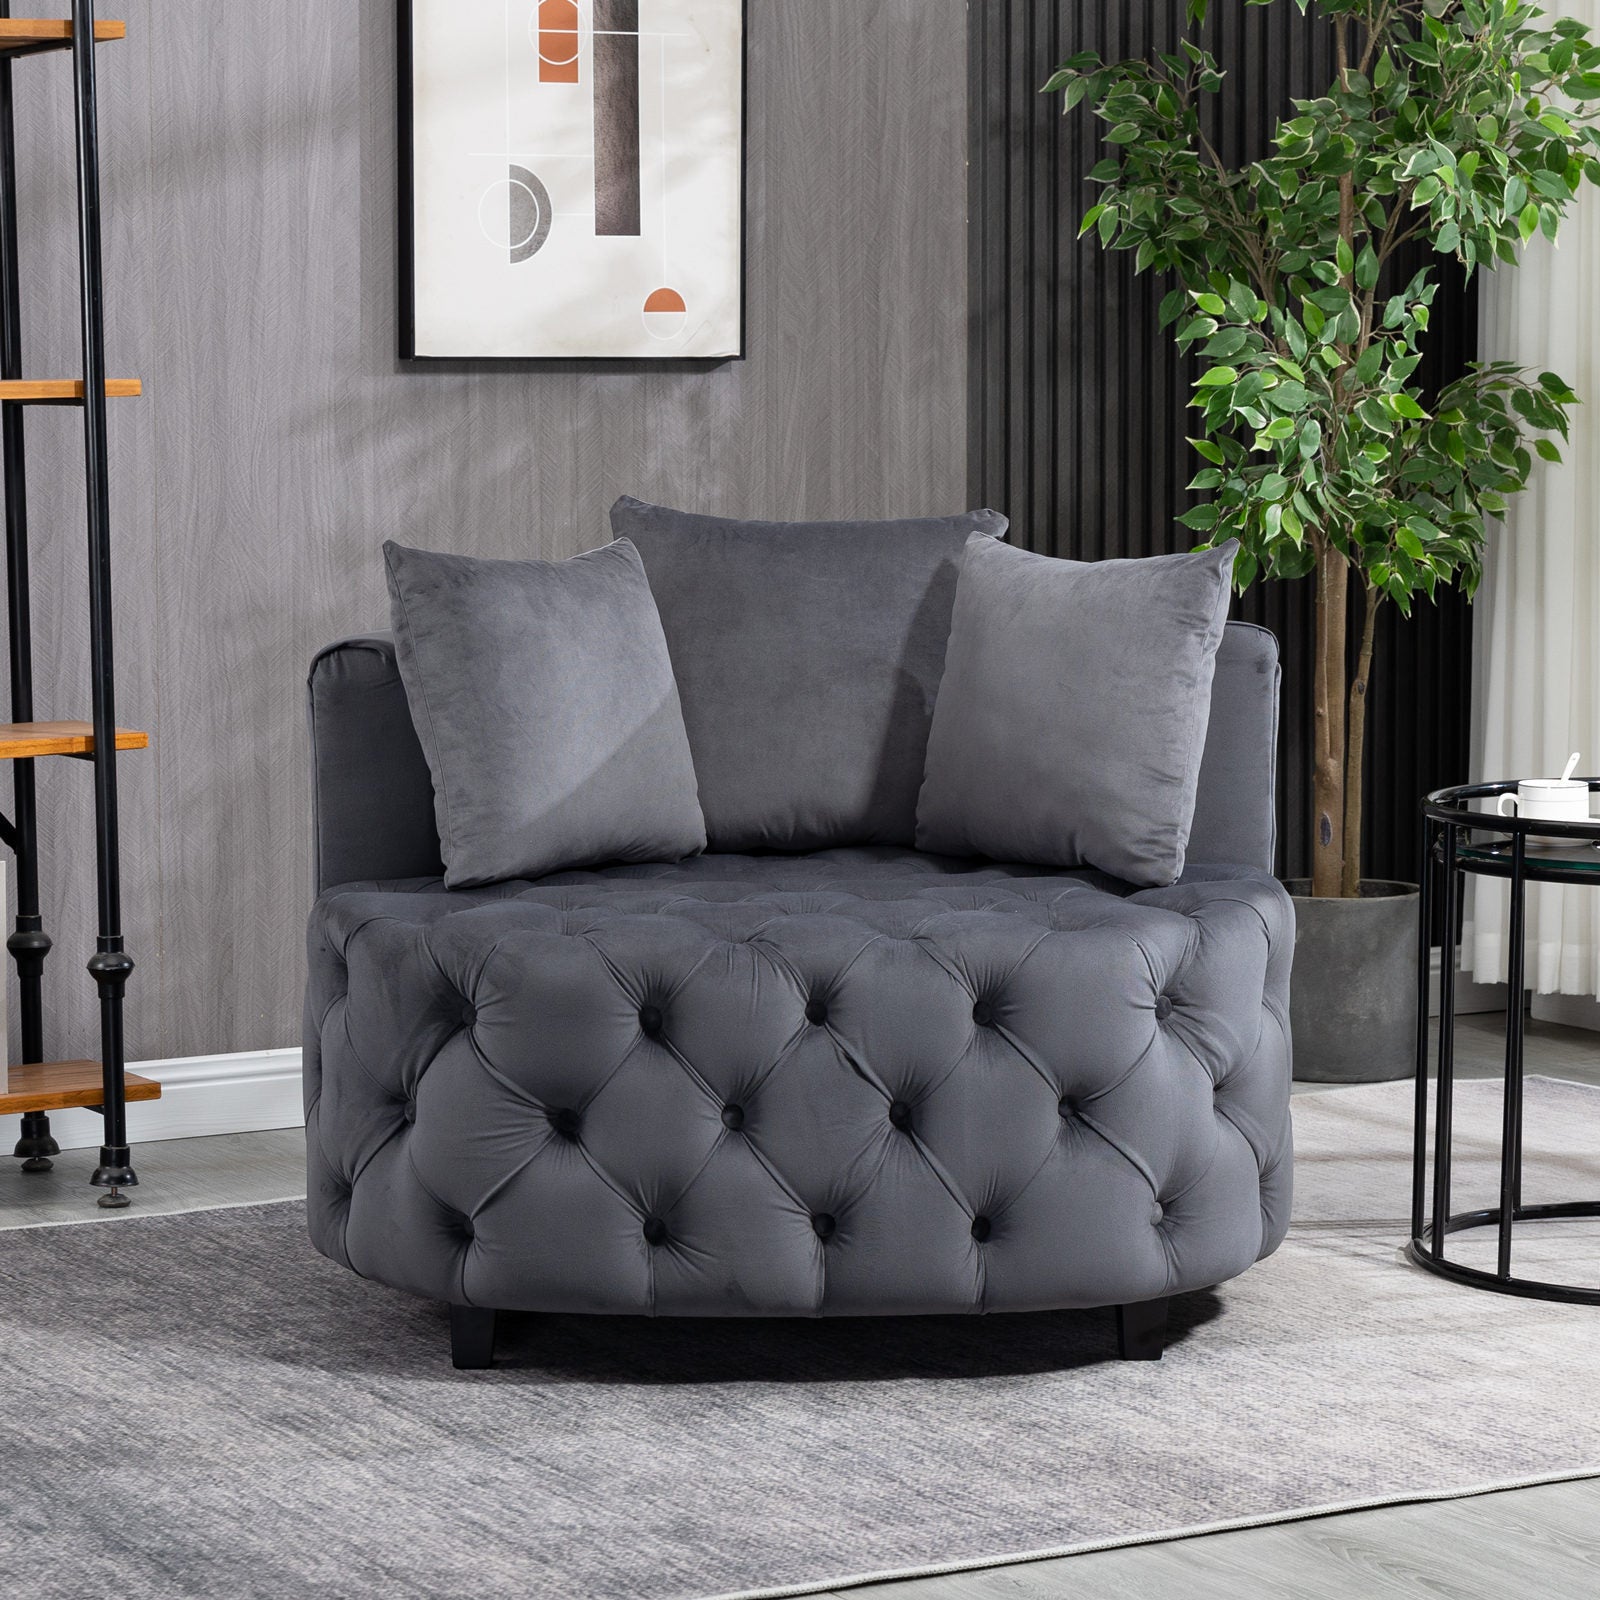 🆓🚛 Accent Chair / Classical Barrel Chair for Living Room / Modern Leisure Chair, Gray